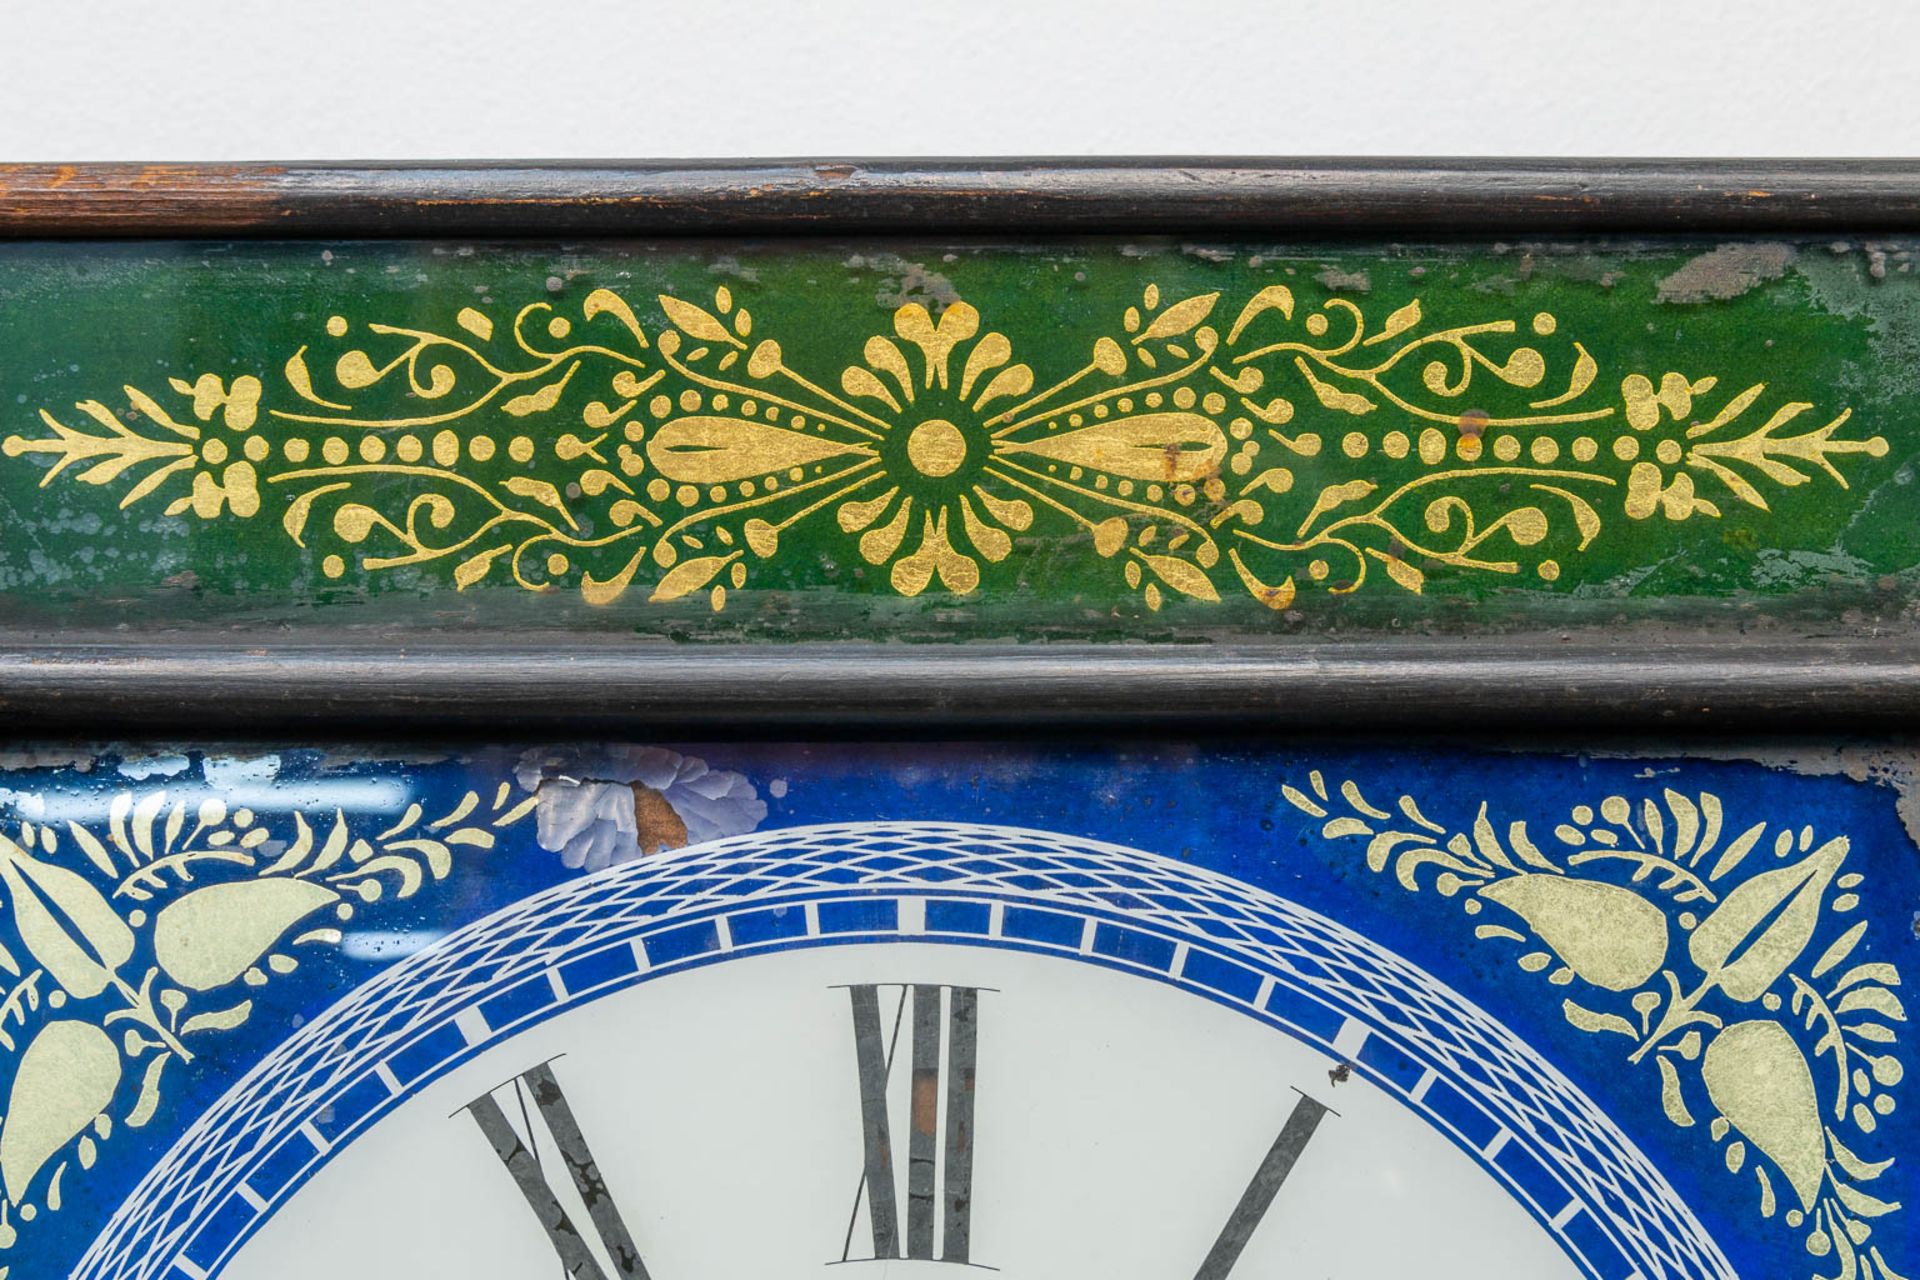 A clock with eglomise reverse glass painting, marked J. Pem Horloger. (12 x 39 x 39 cm) - Image 7 of 8